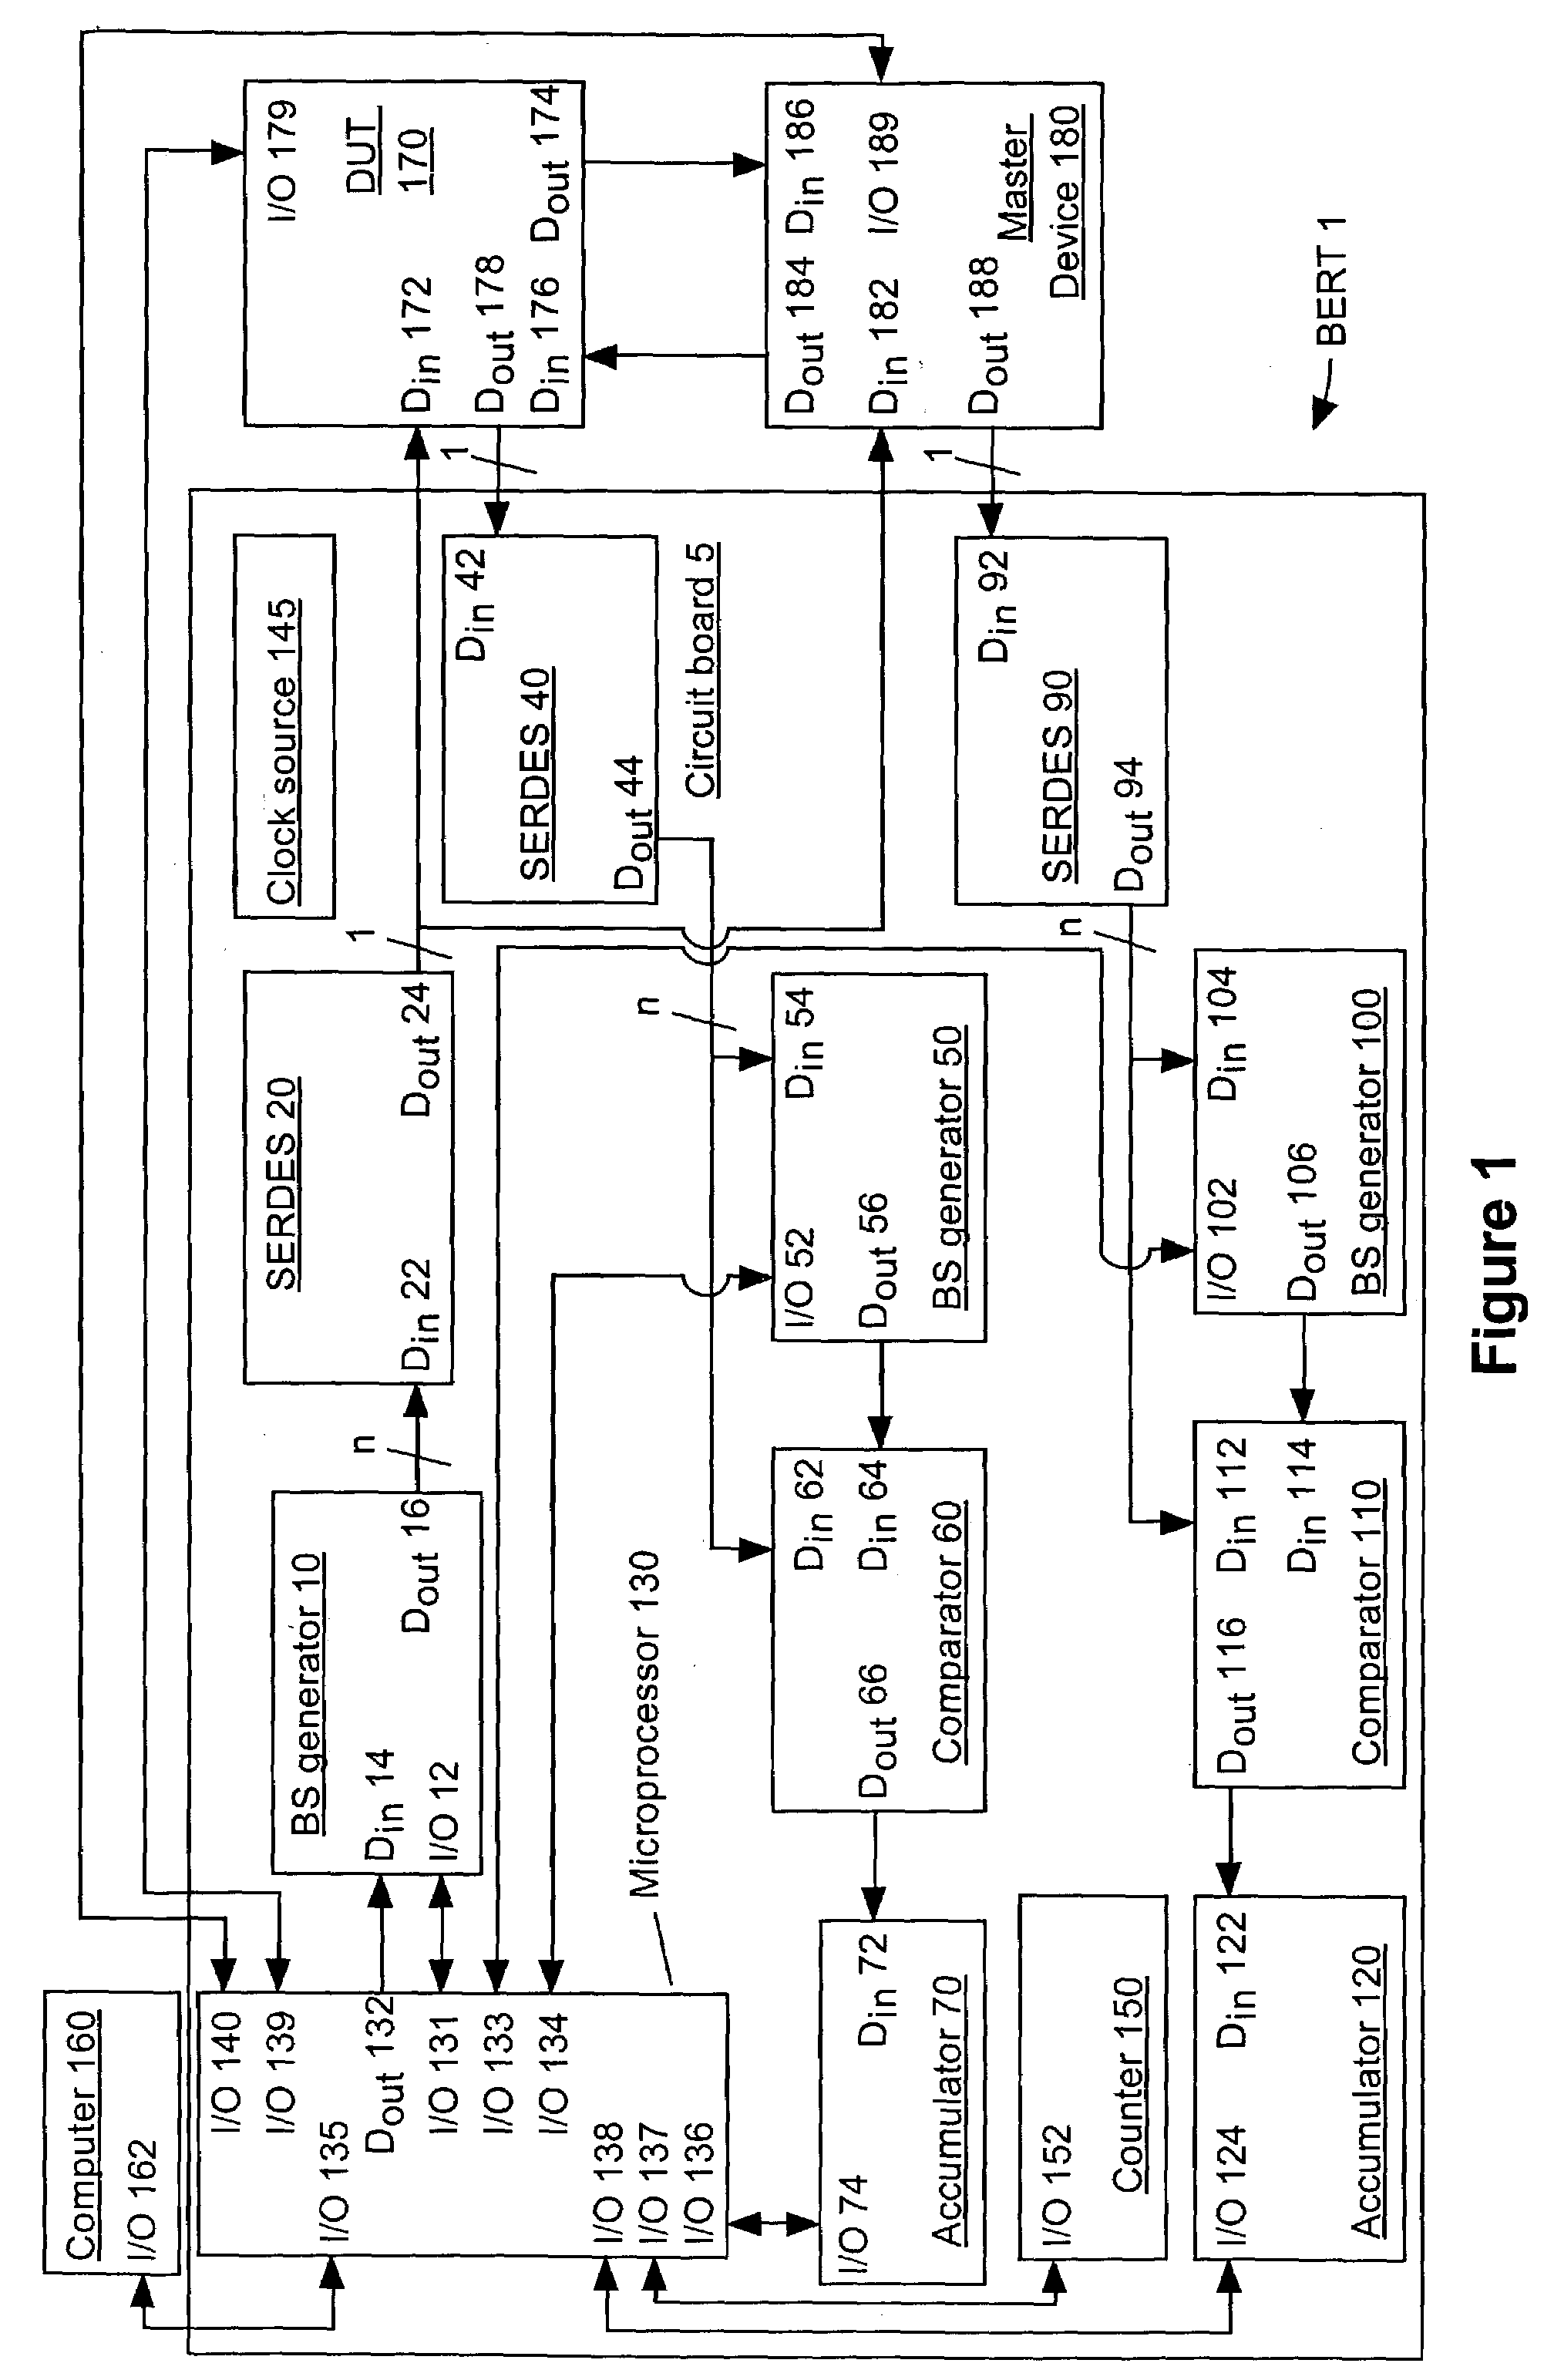 System and method of detecting a bit processing error